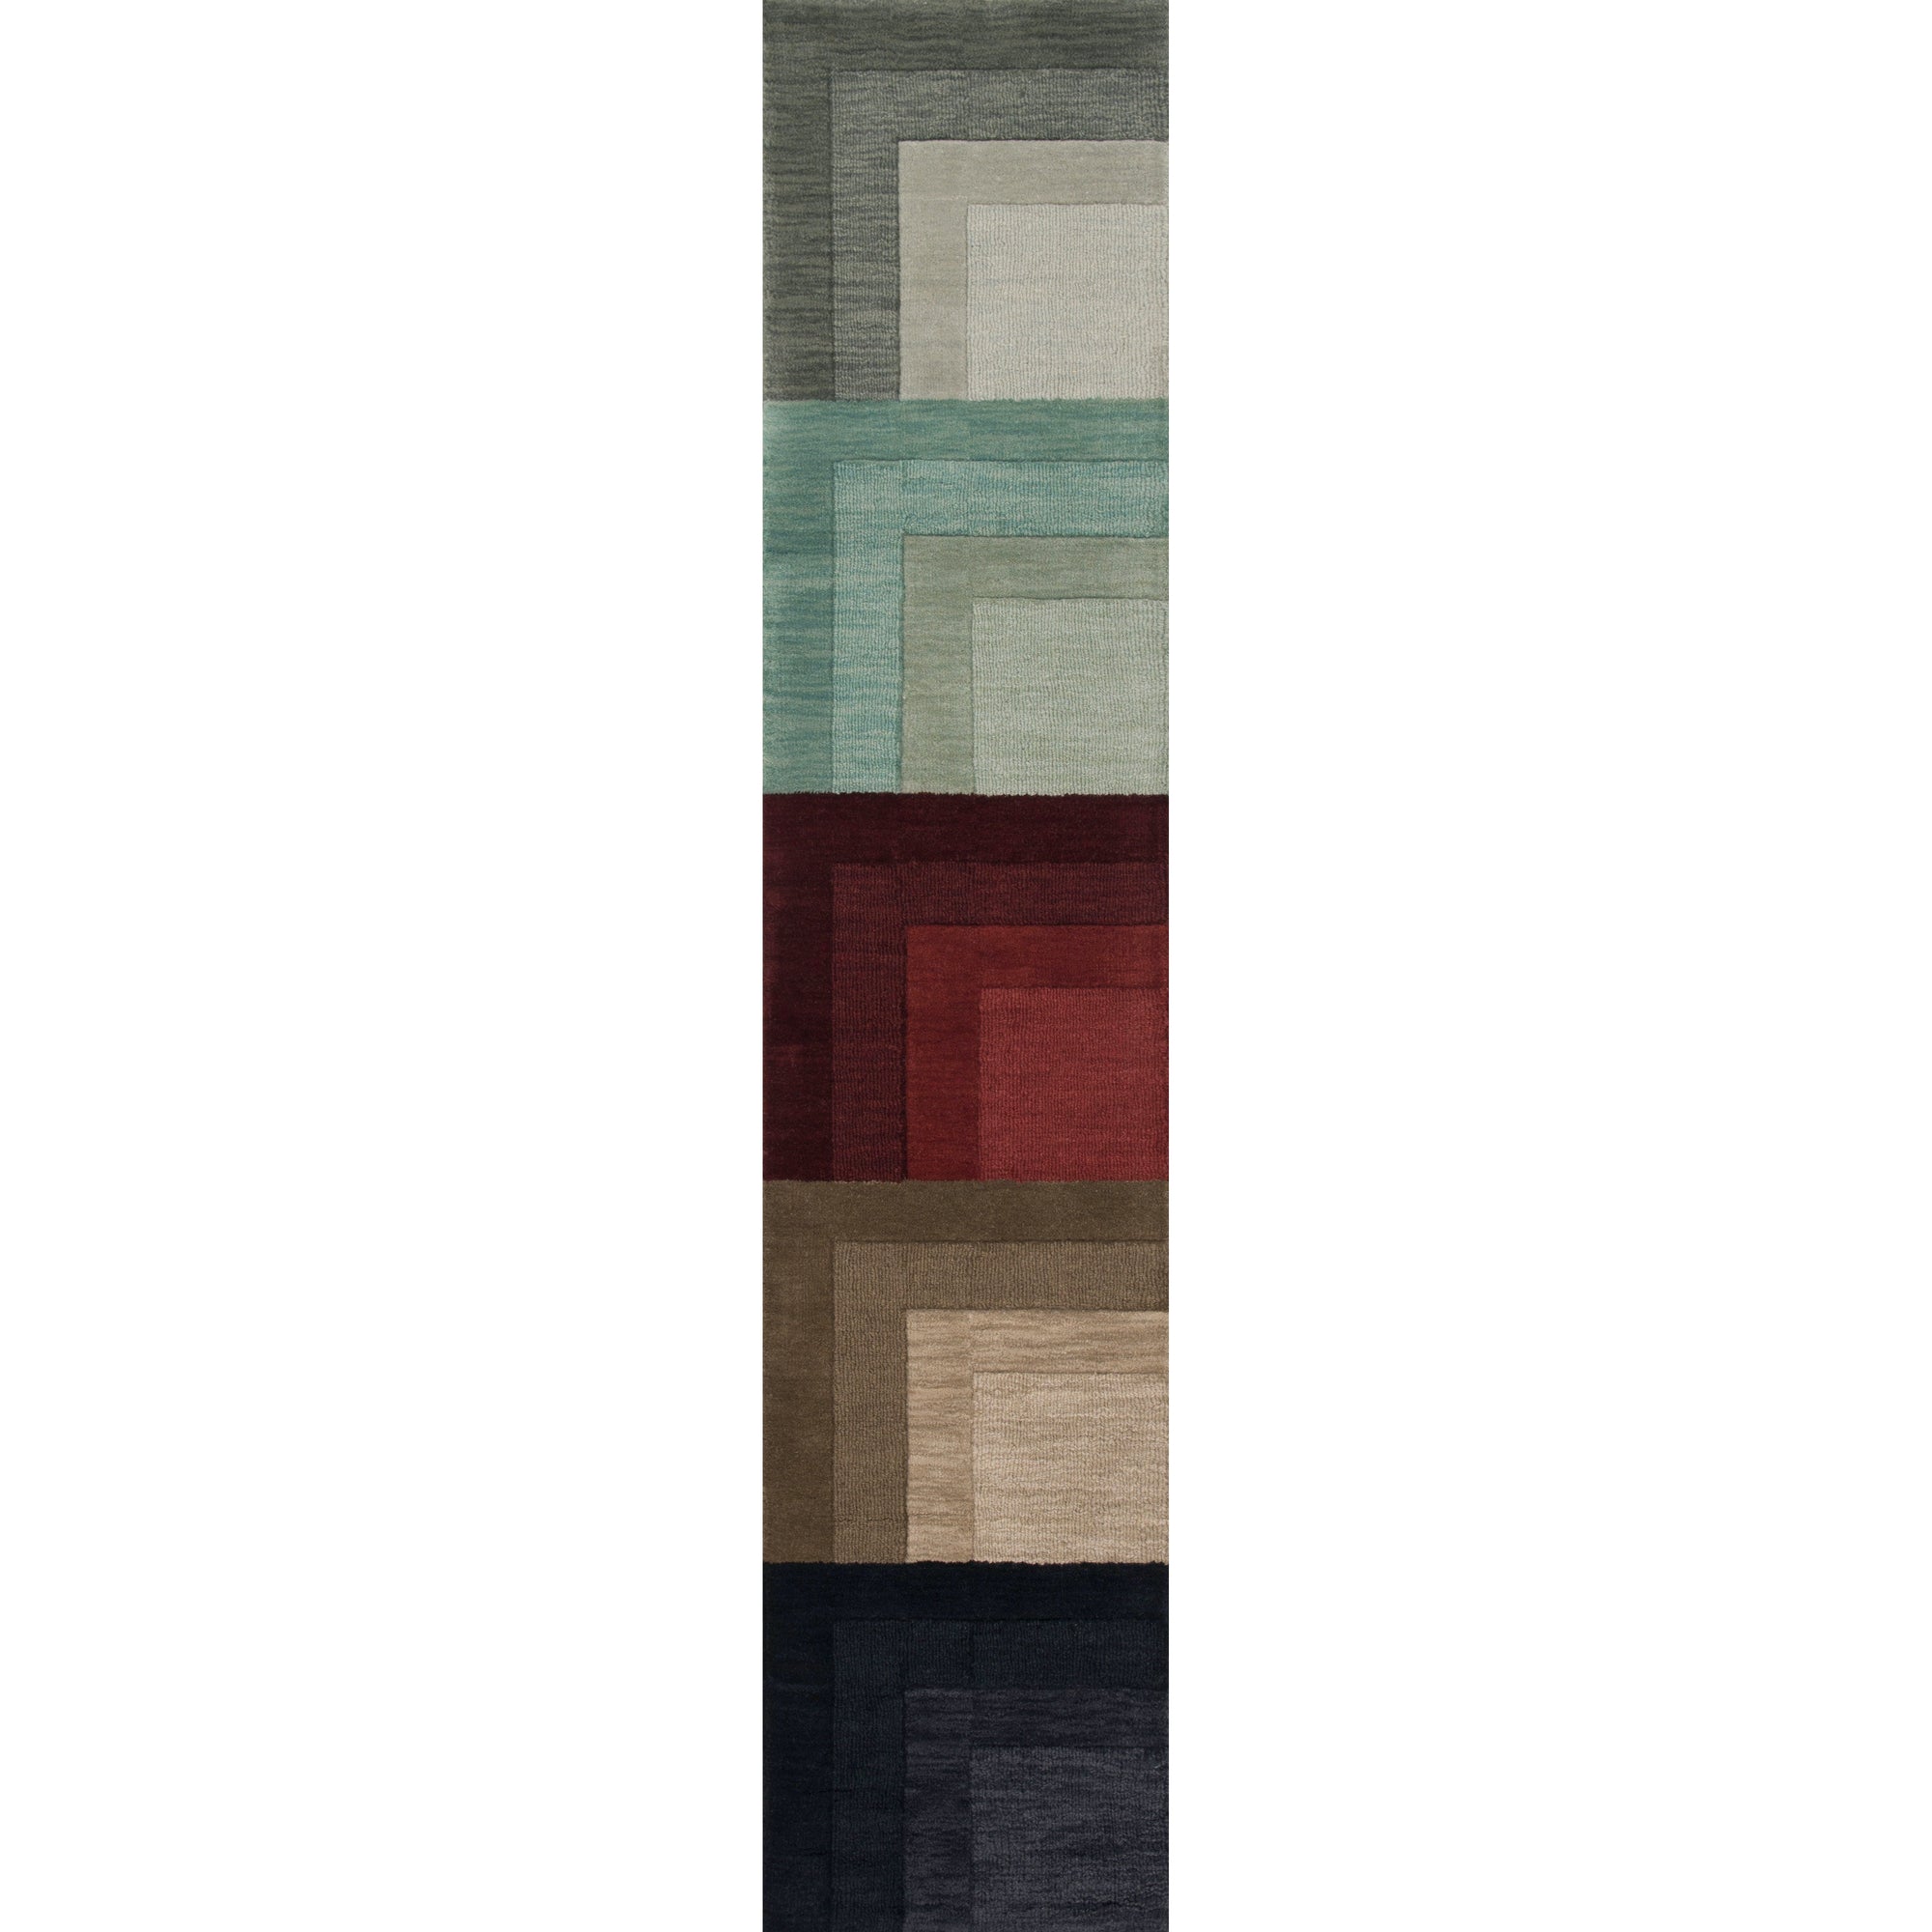 Rugs by Roo Loloi Hamilton Color Blanket 3 Area Rug in size 1' x 5'